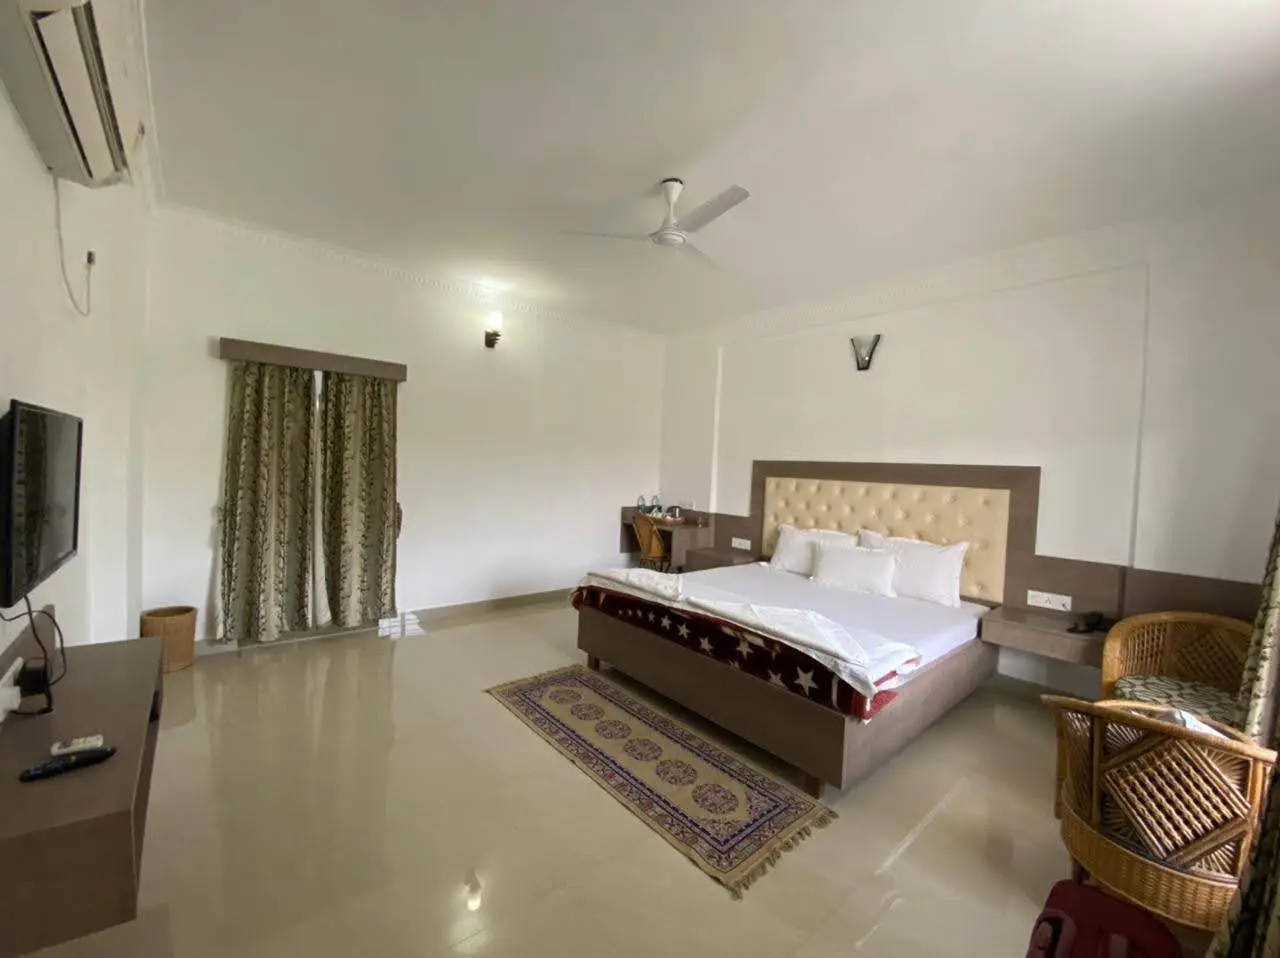 Sundarban hilsa festival plan with deluxe hotel room from Tourist Hub India